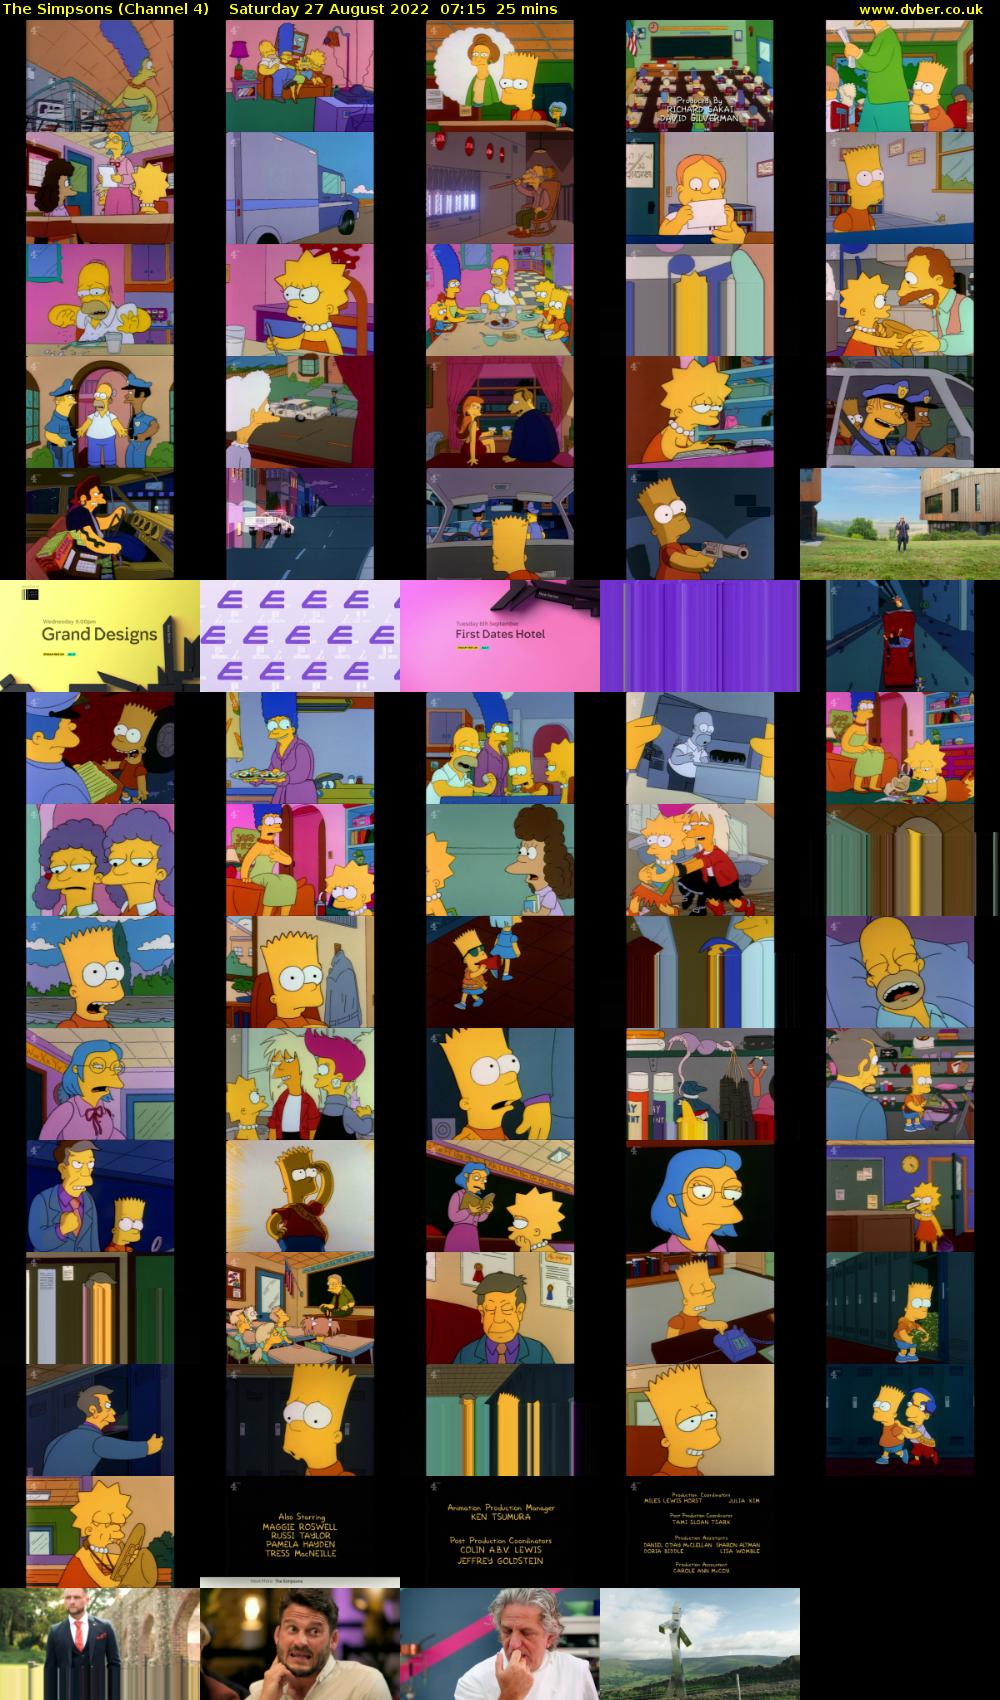 The Simpsons (Channel 4) Saturday 27 August 2022 07:15 - 07:40